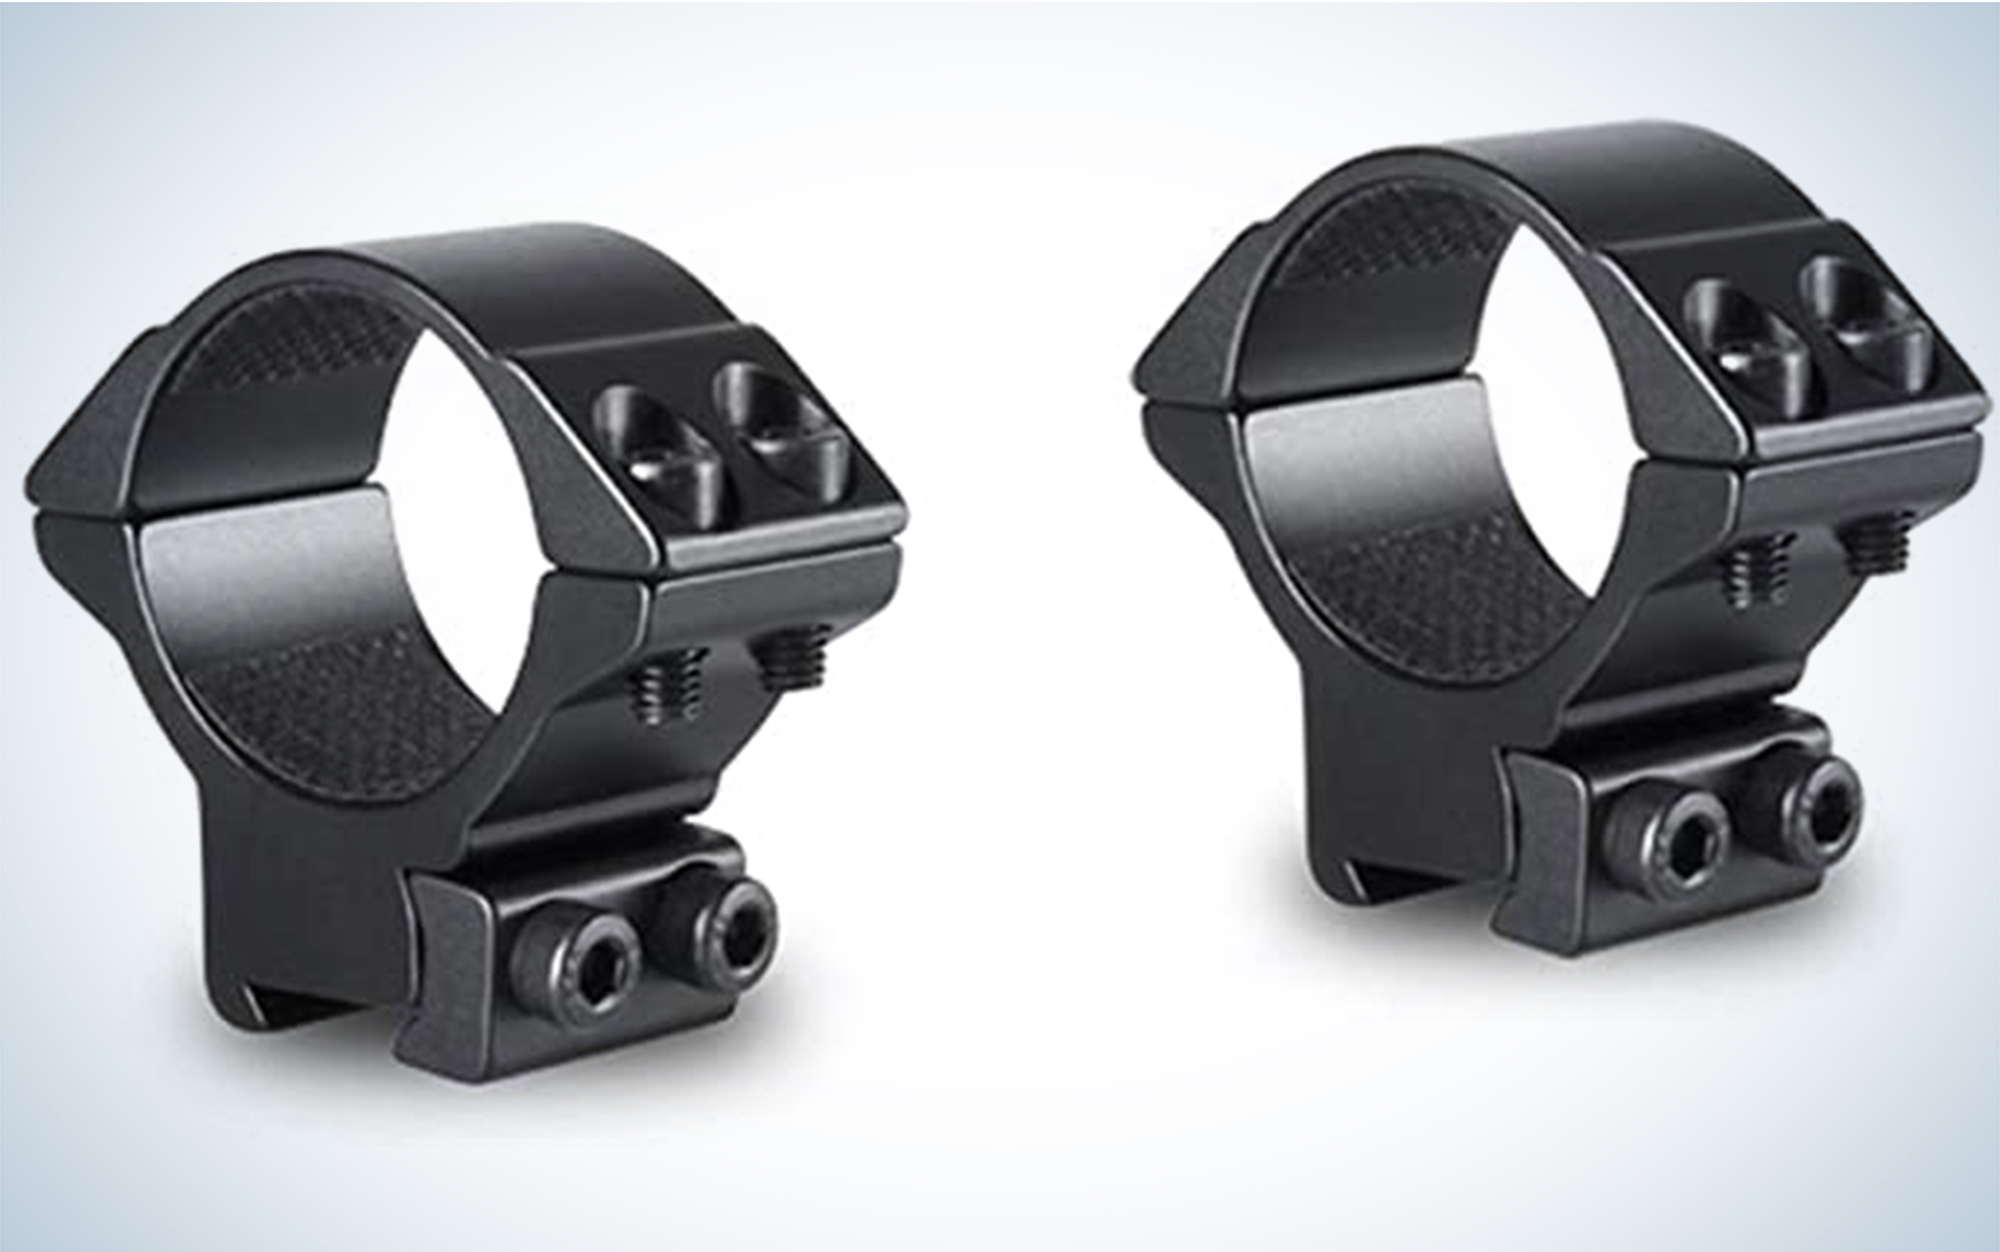 Hawke Match Ring Mounts are one of the best scope rings.